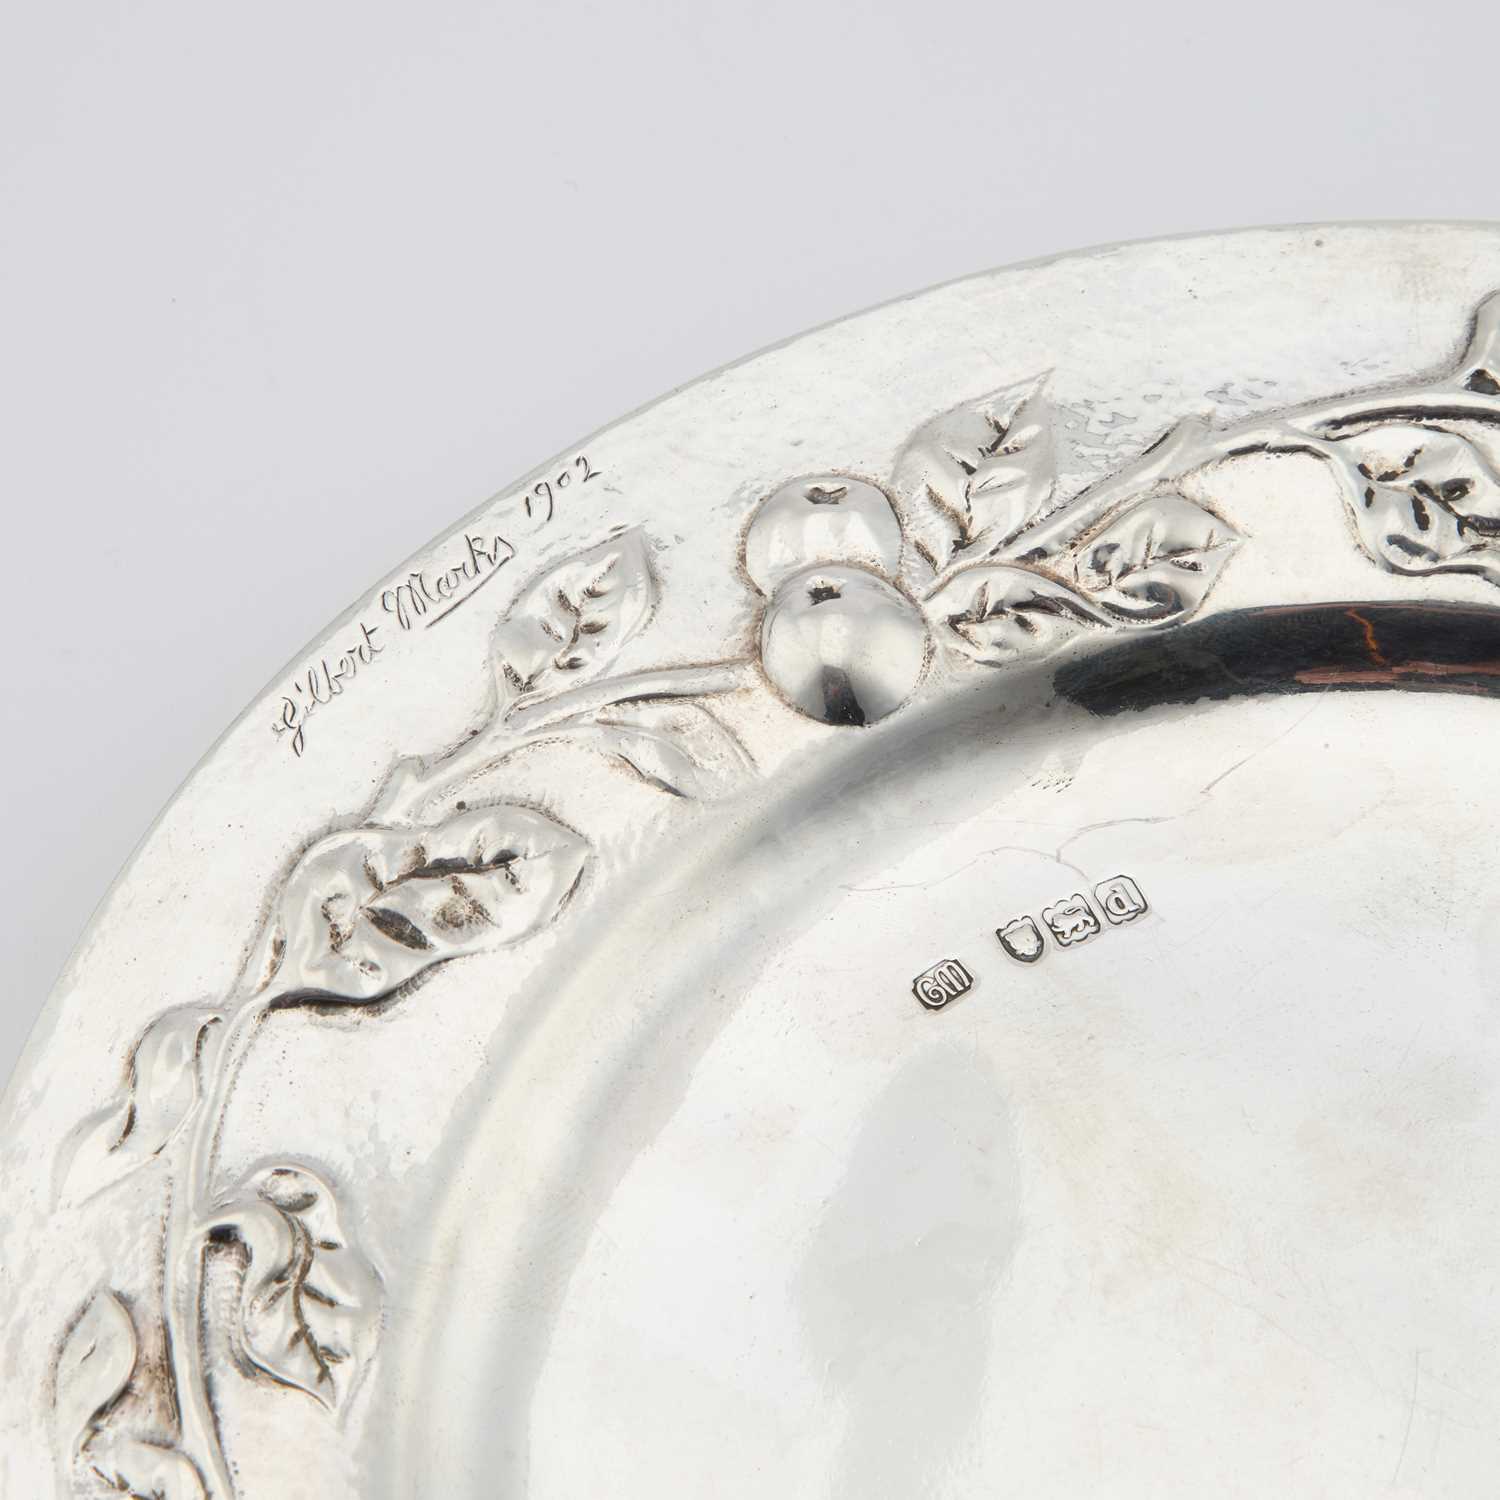 GILBERT MARKS (1861-1905), AN ARTS AND CRAFTS SILVER PLATE - Image 2 of 2